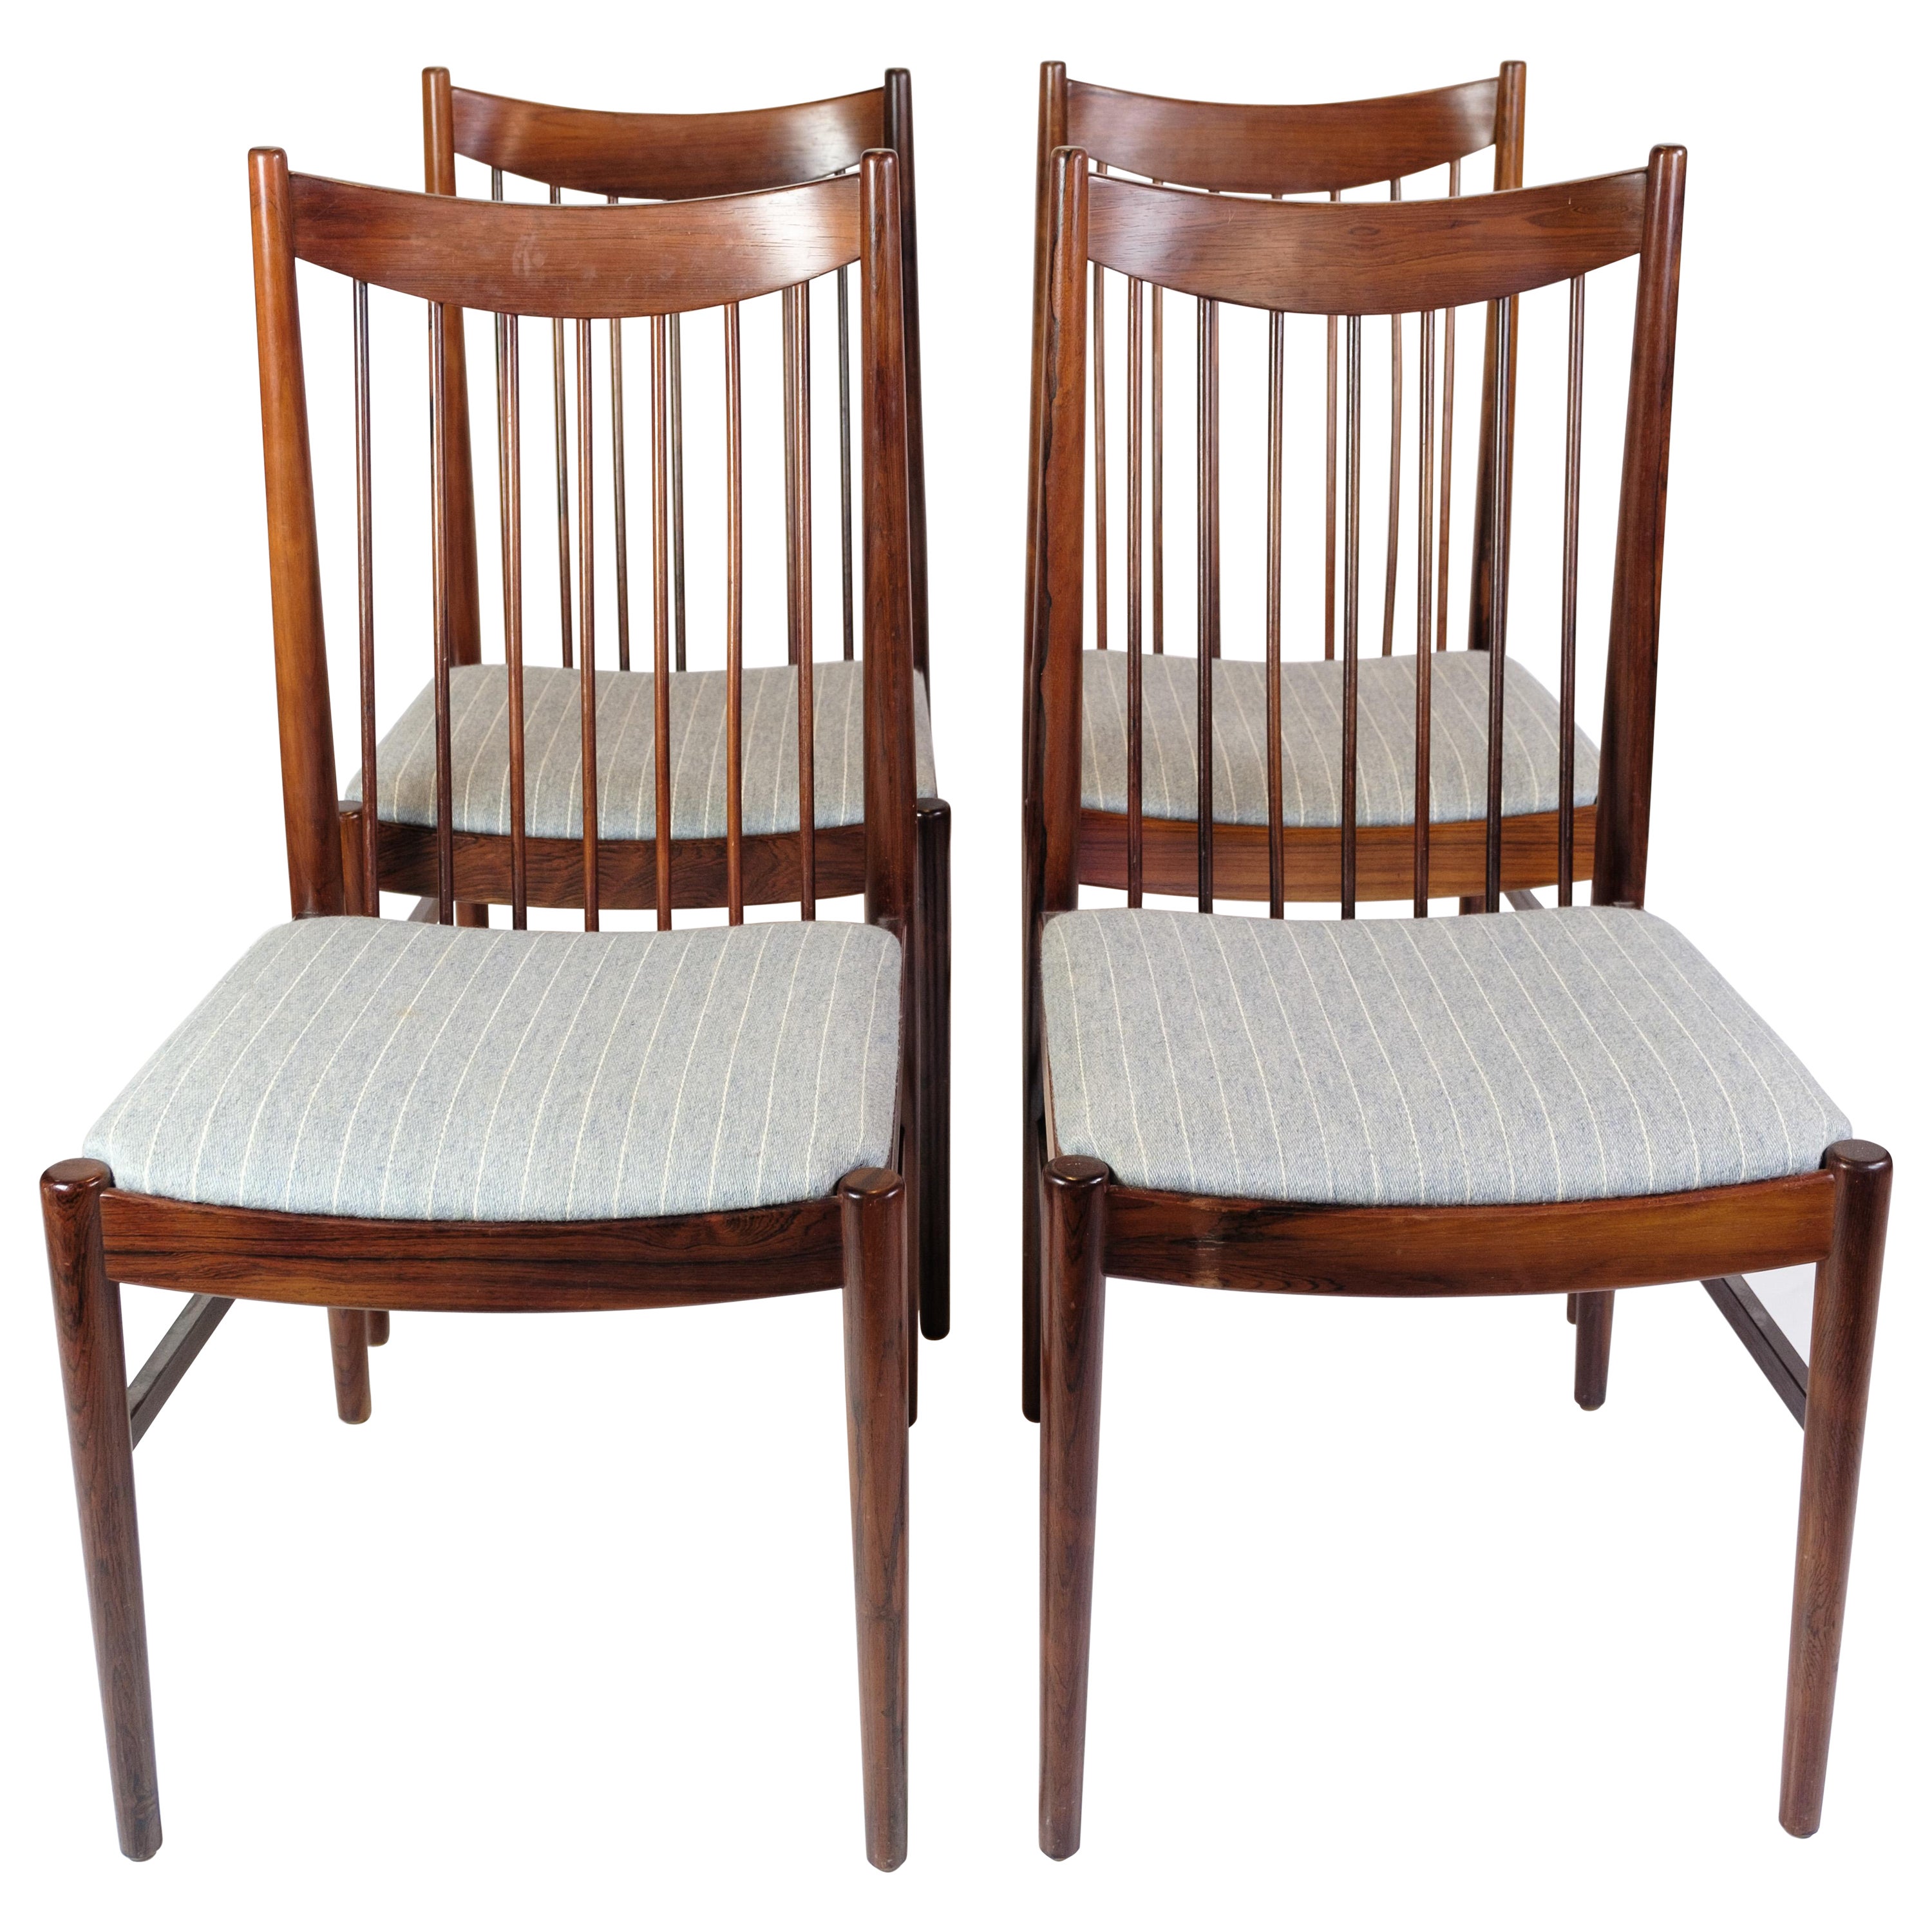 Set Of 4 Dining Room Chairs Model 422 Made In Rosewood By Arne Vodder From 1960s For Sale